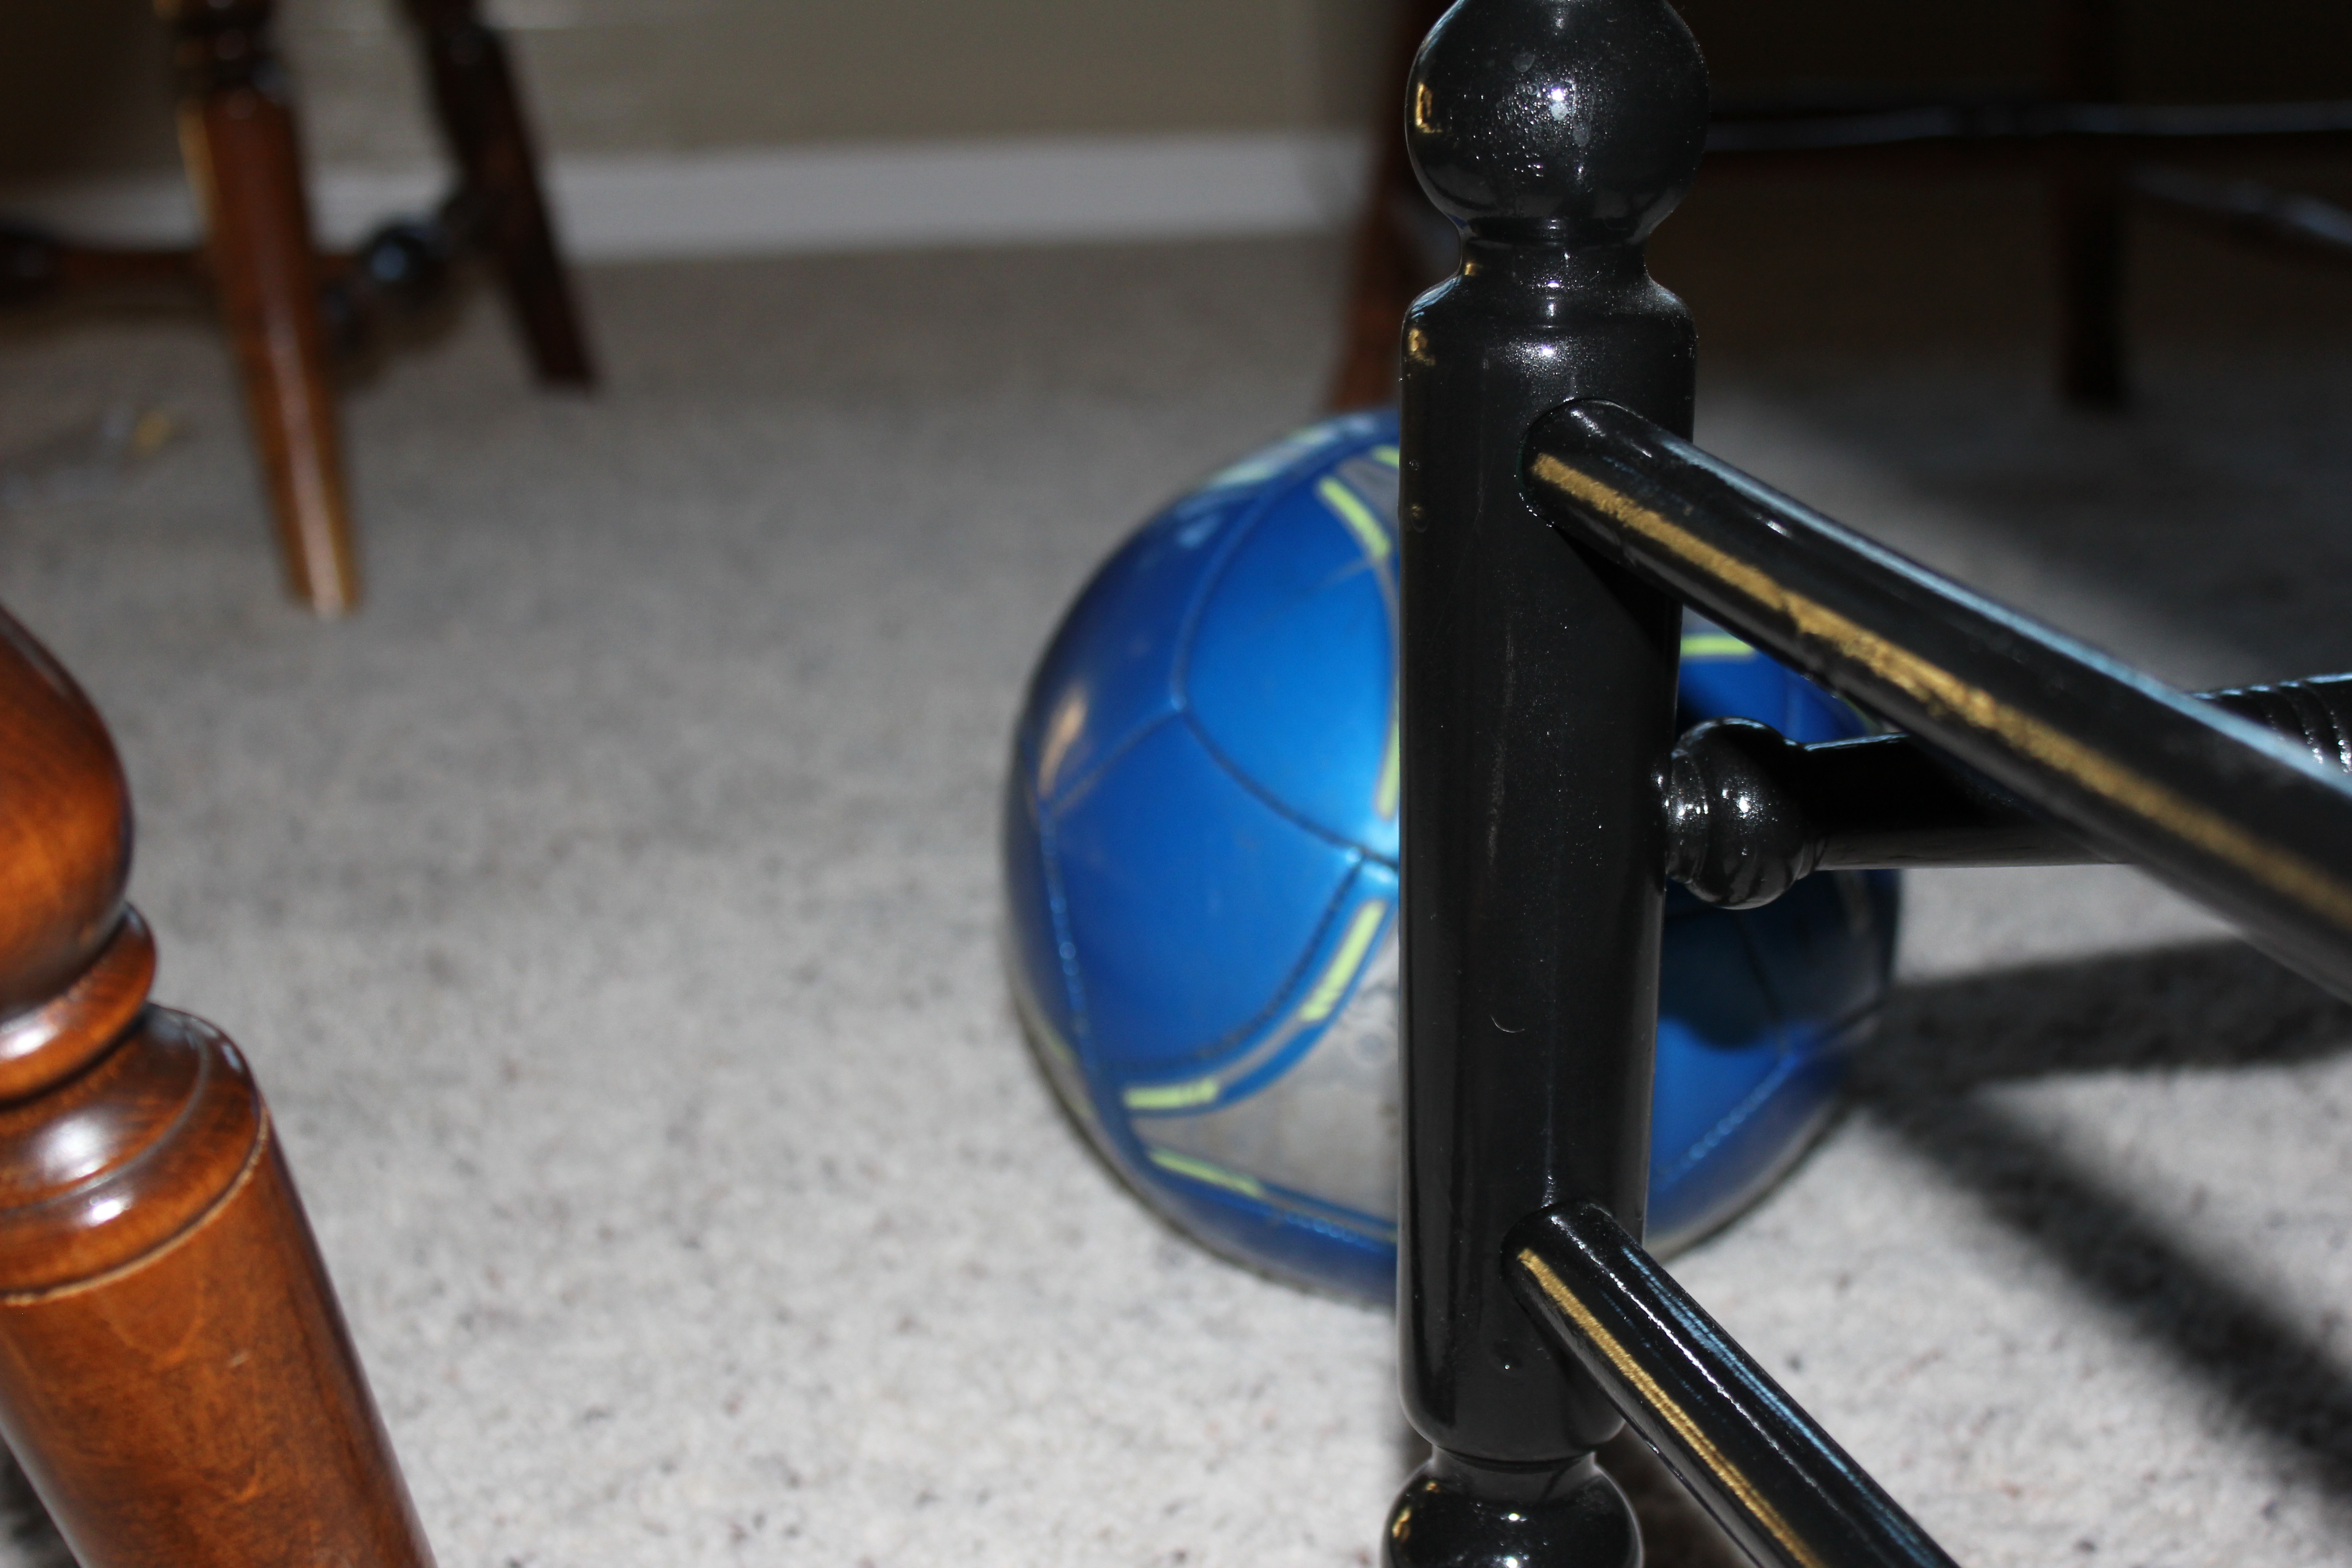 the blue soccer ball that normally lives in the dining room